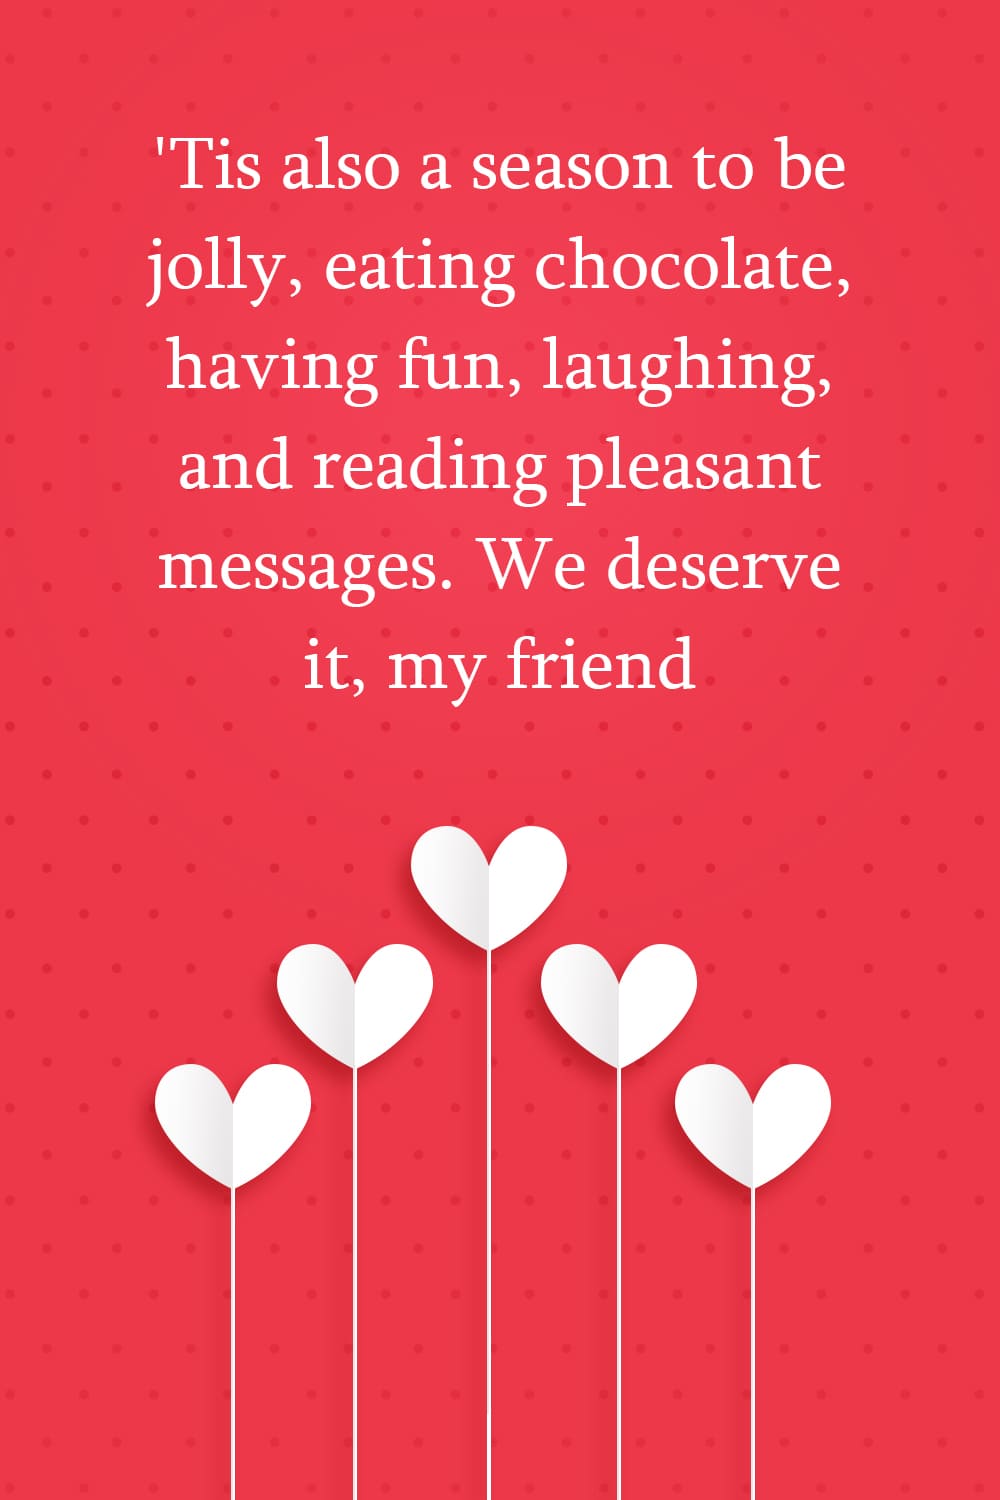 'Tis also a season to be jolly, eating chocolate, having fun, laughing, and reading pleasant messages. We deserve it, my friend.